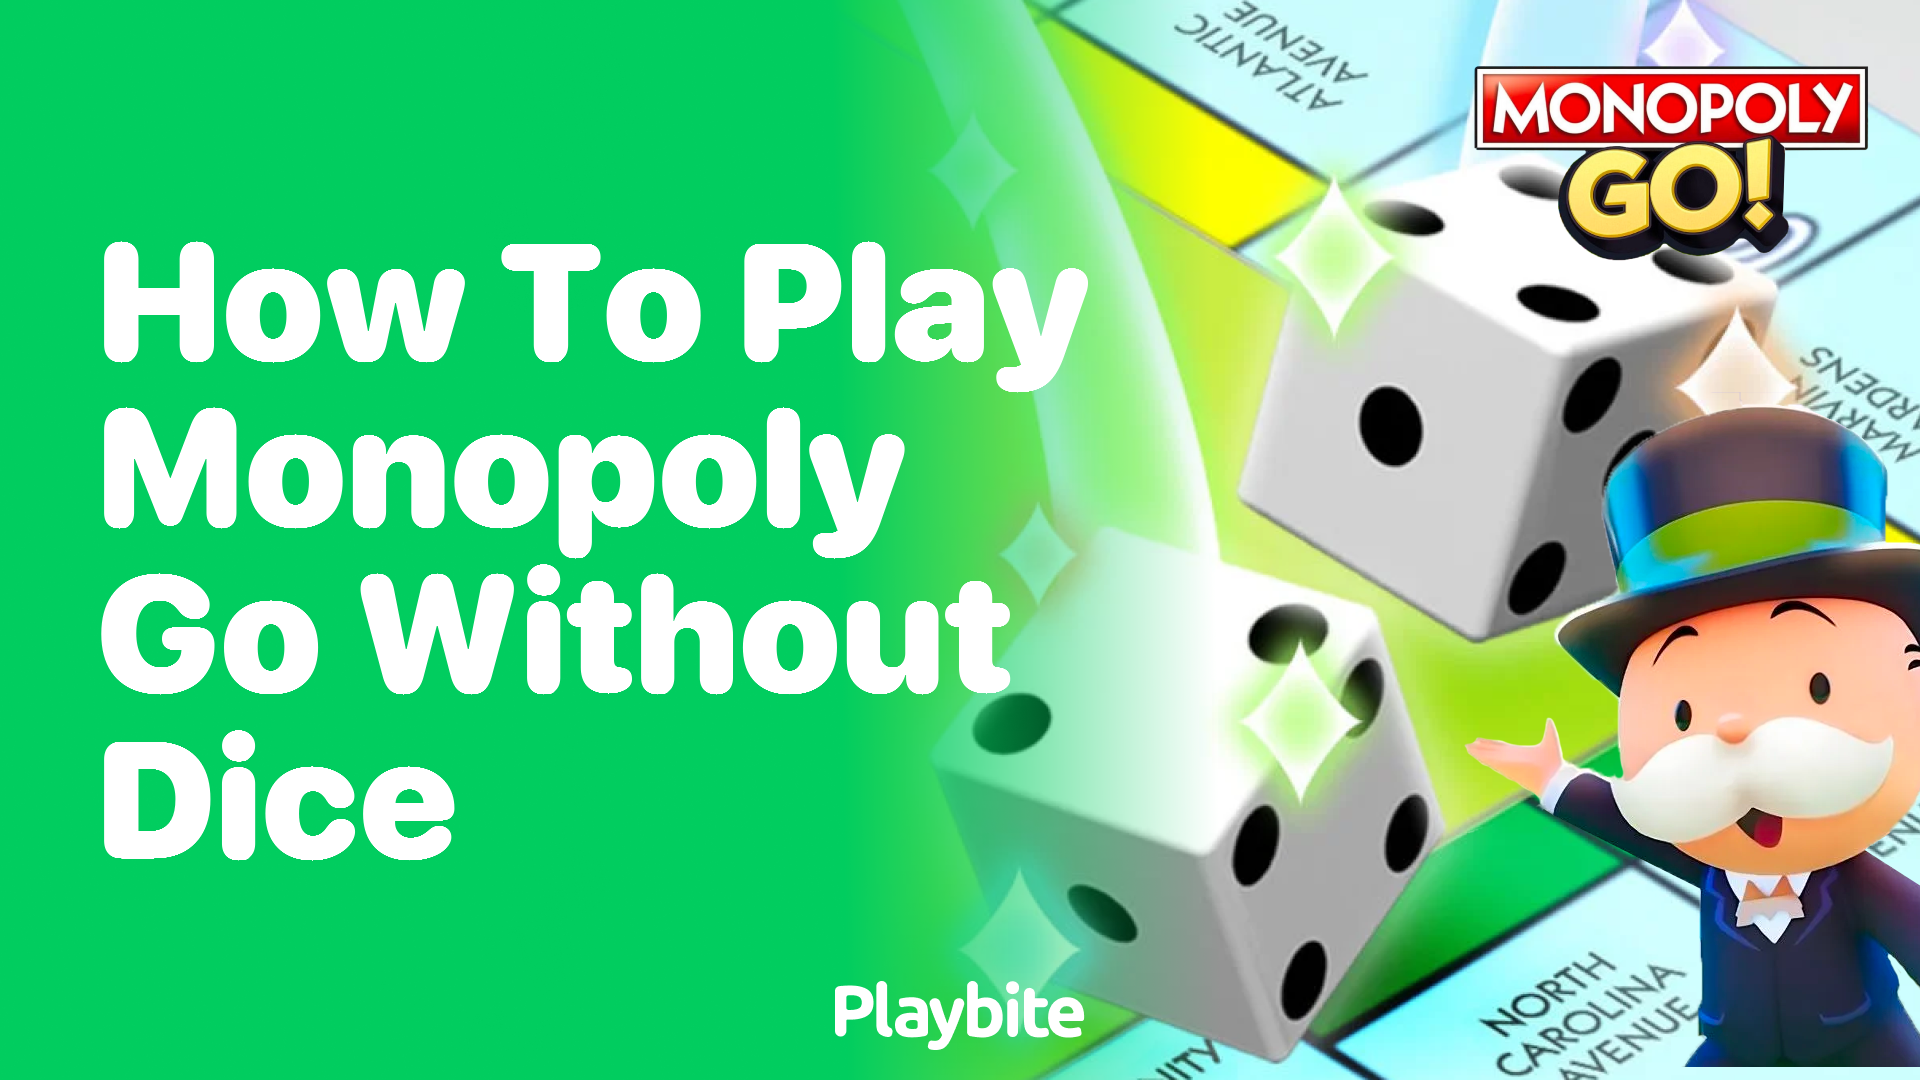 How to Play Monopoly Go Without Dice